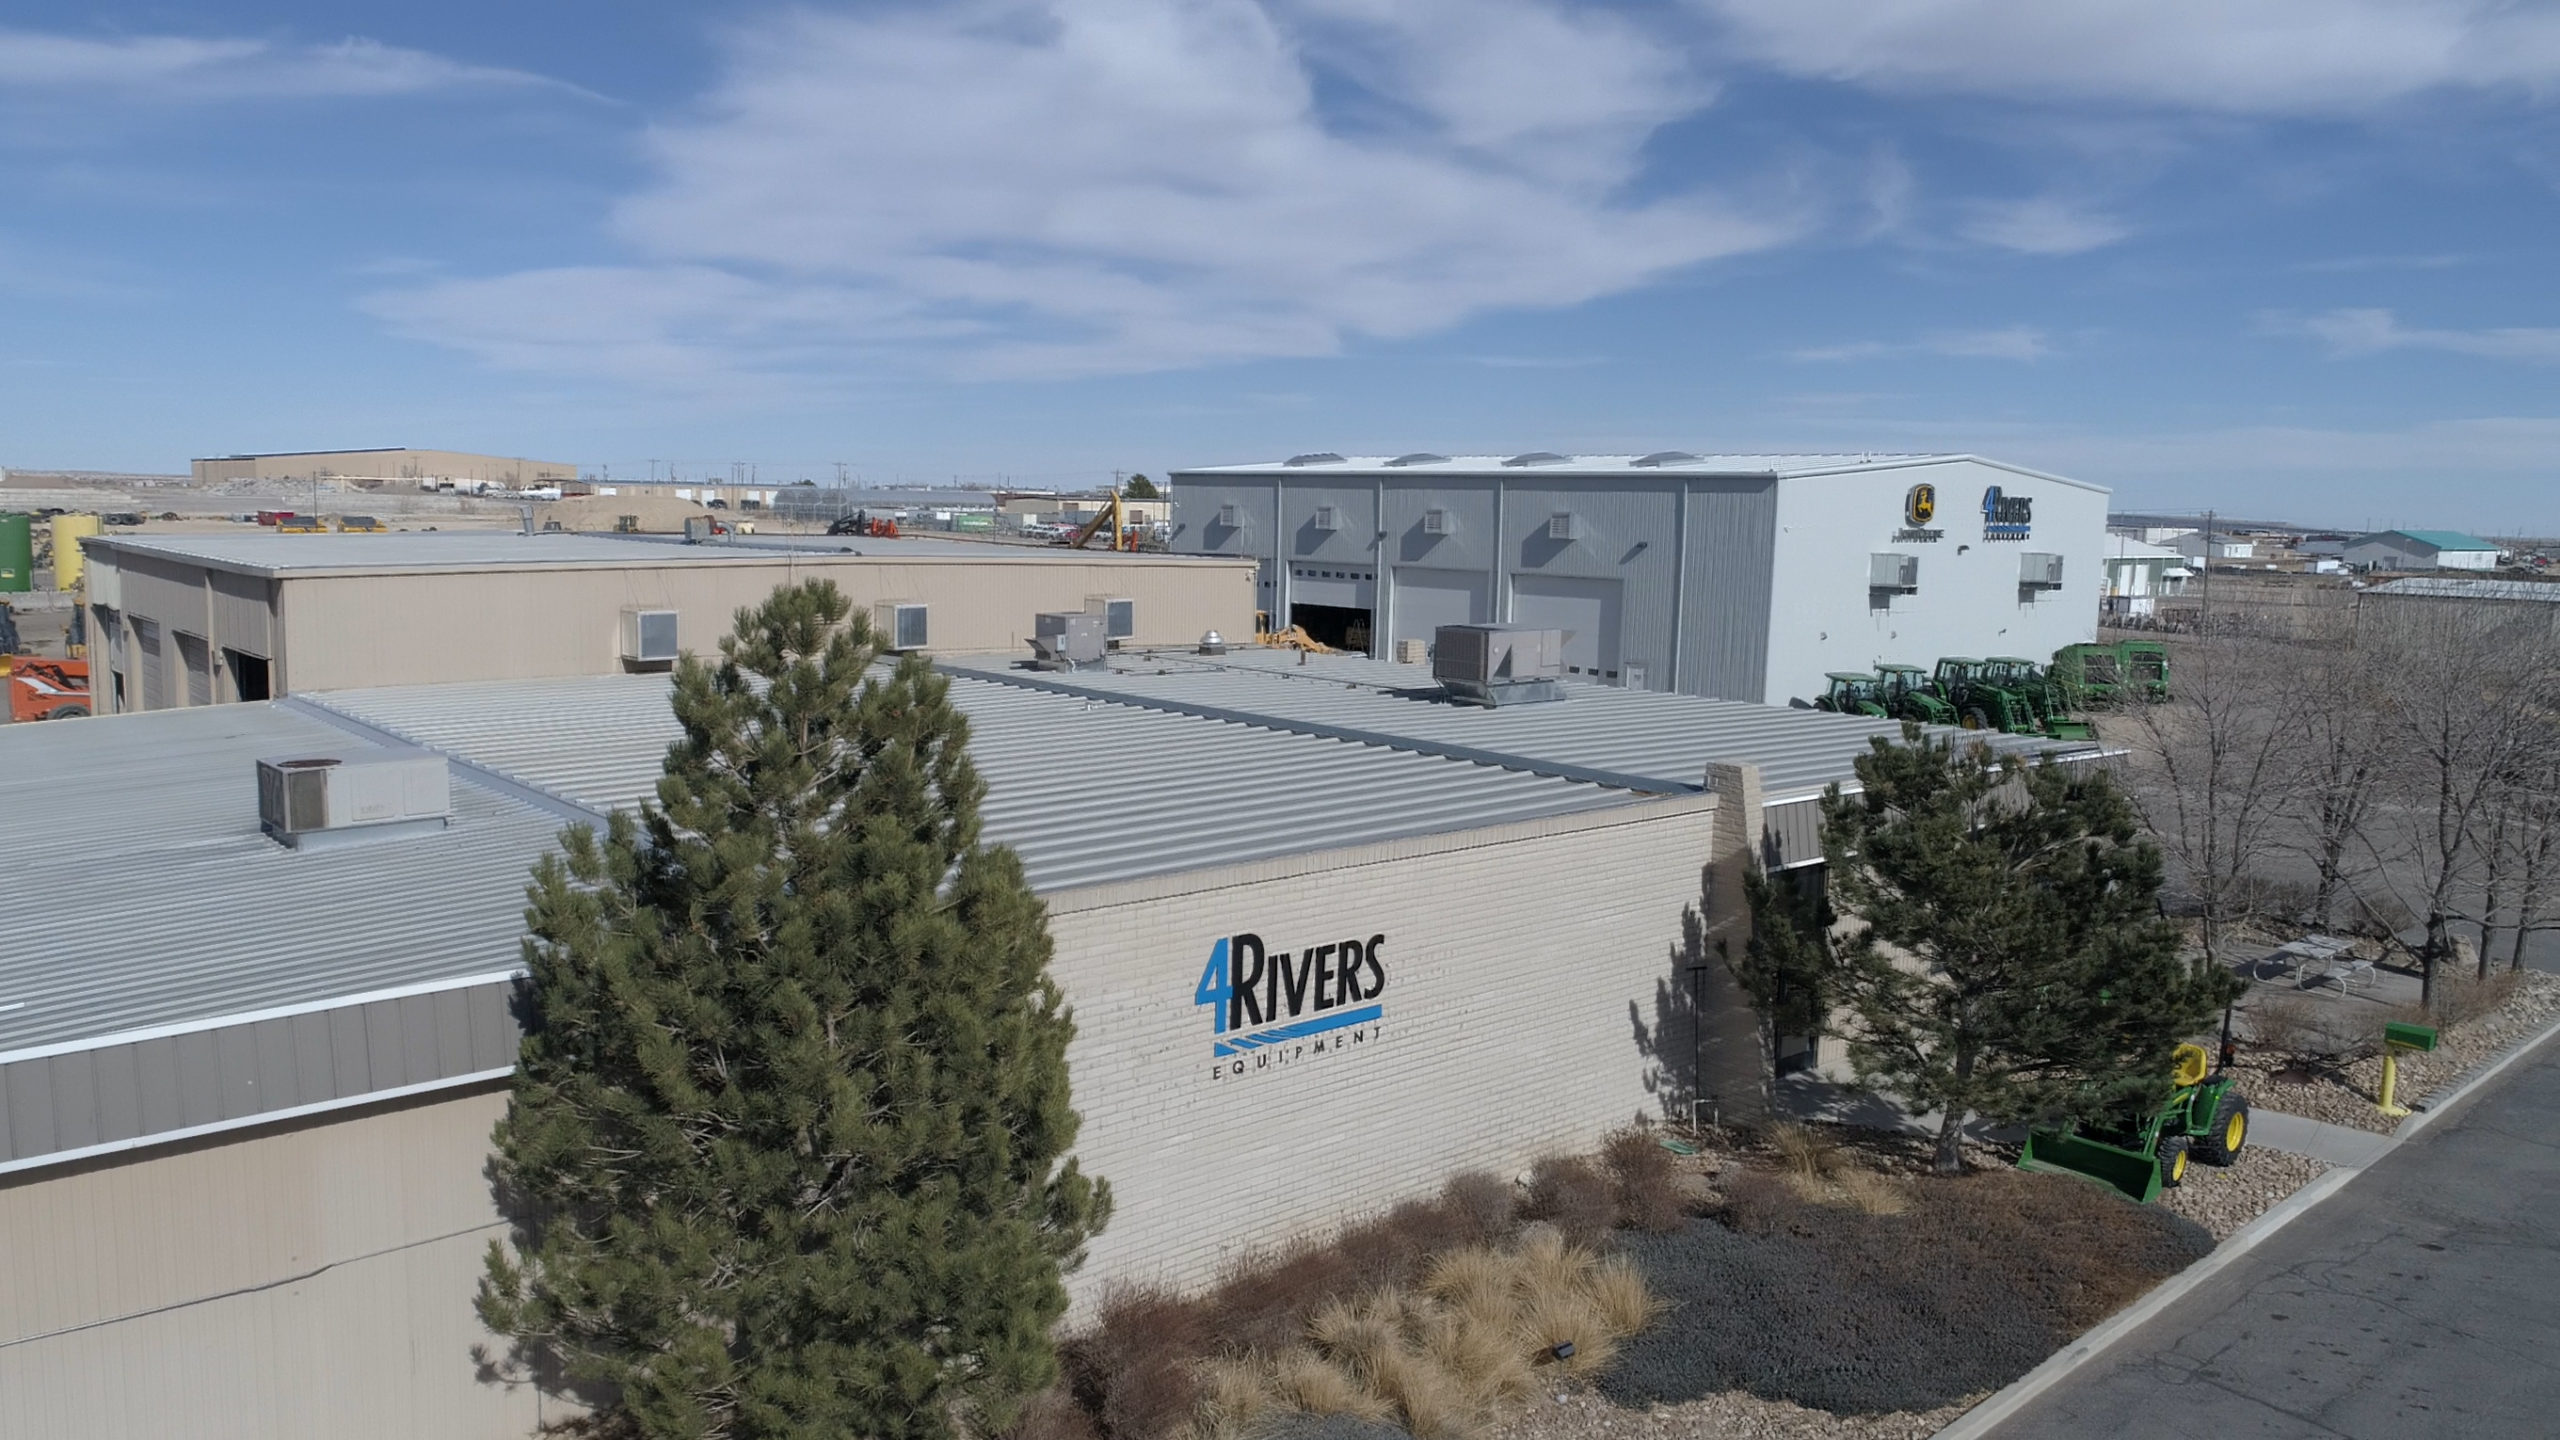 Our 4Rivers Equipment Pueblo West location provides industry-leading John Deere equipment support and service.